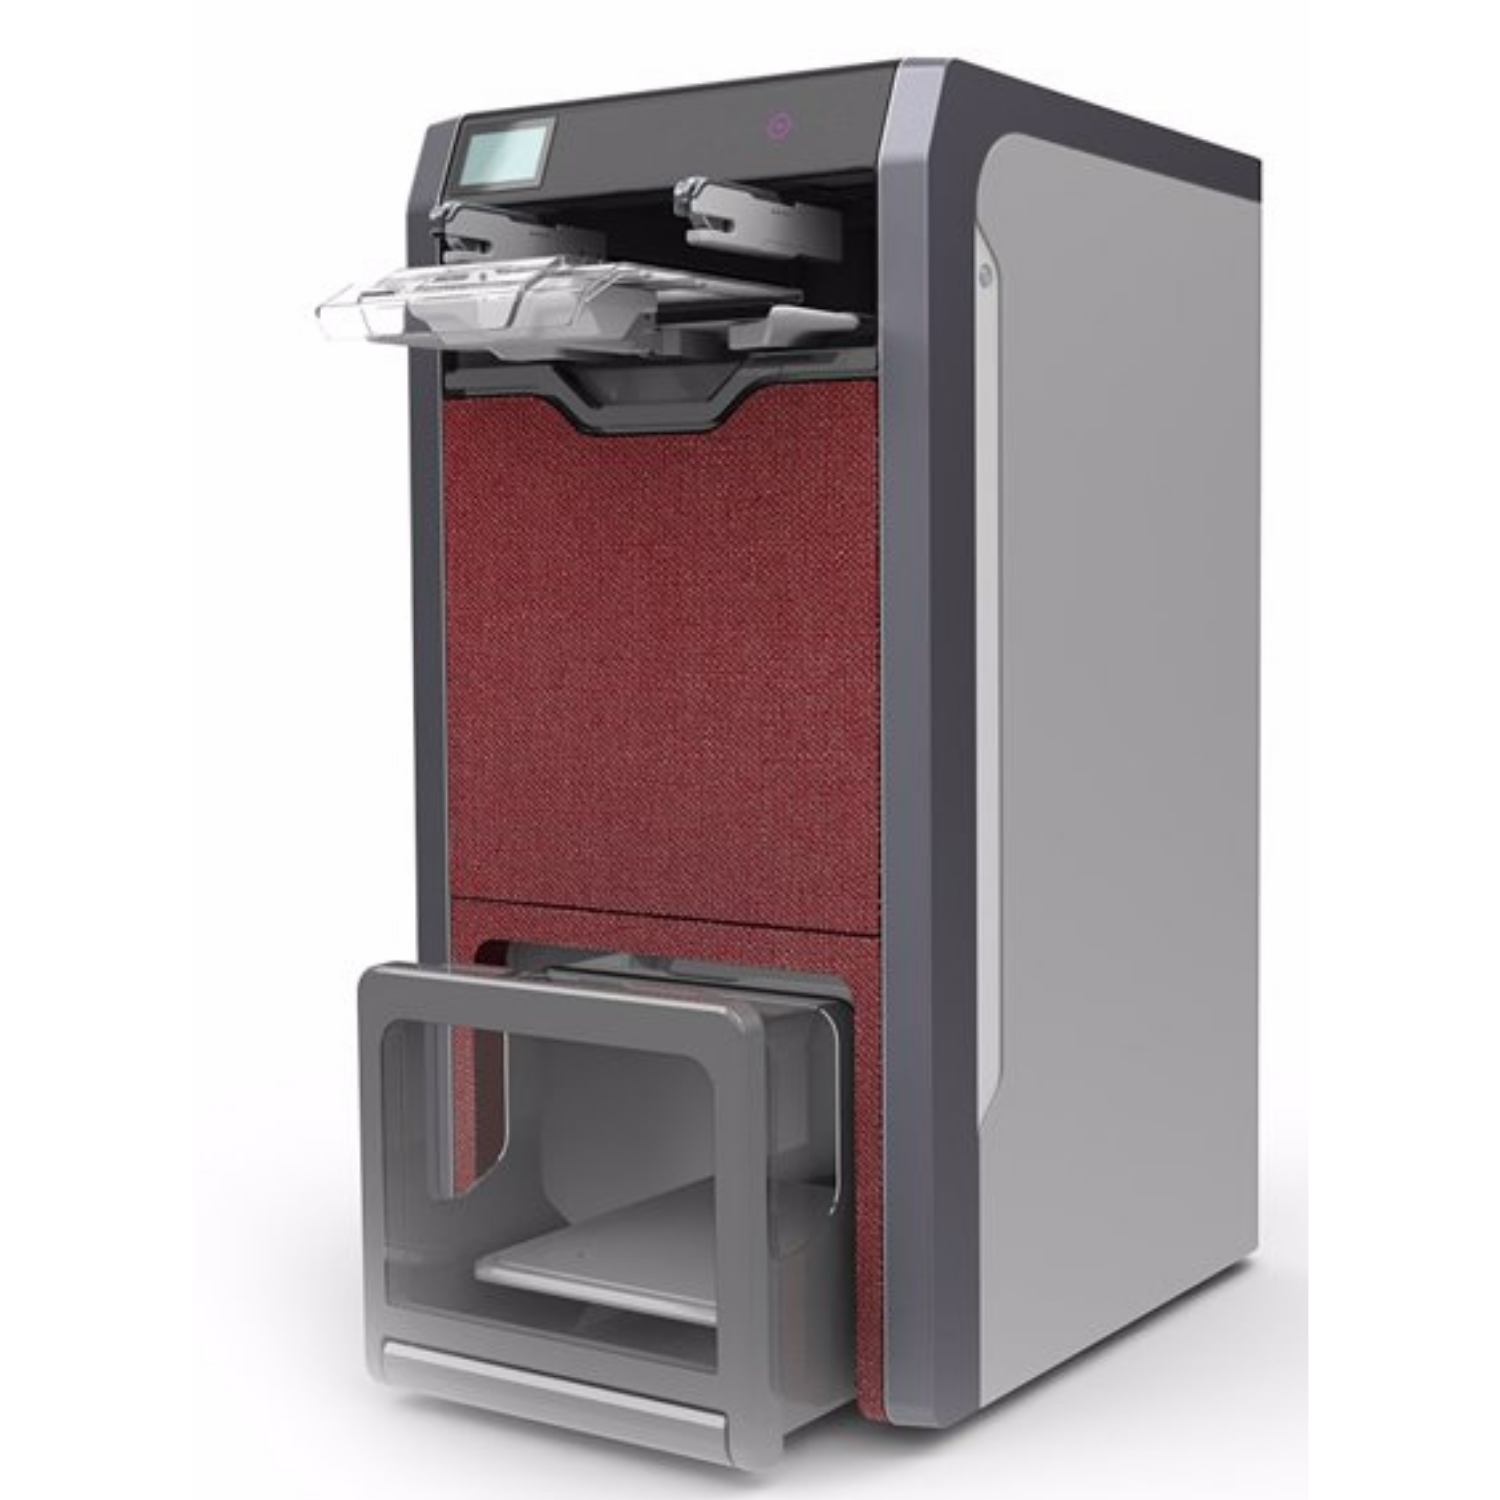 FoldiMate aims to takes the drudgery out of folding laundry - The Gadgeteer